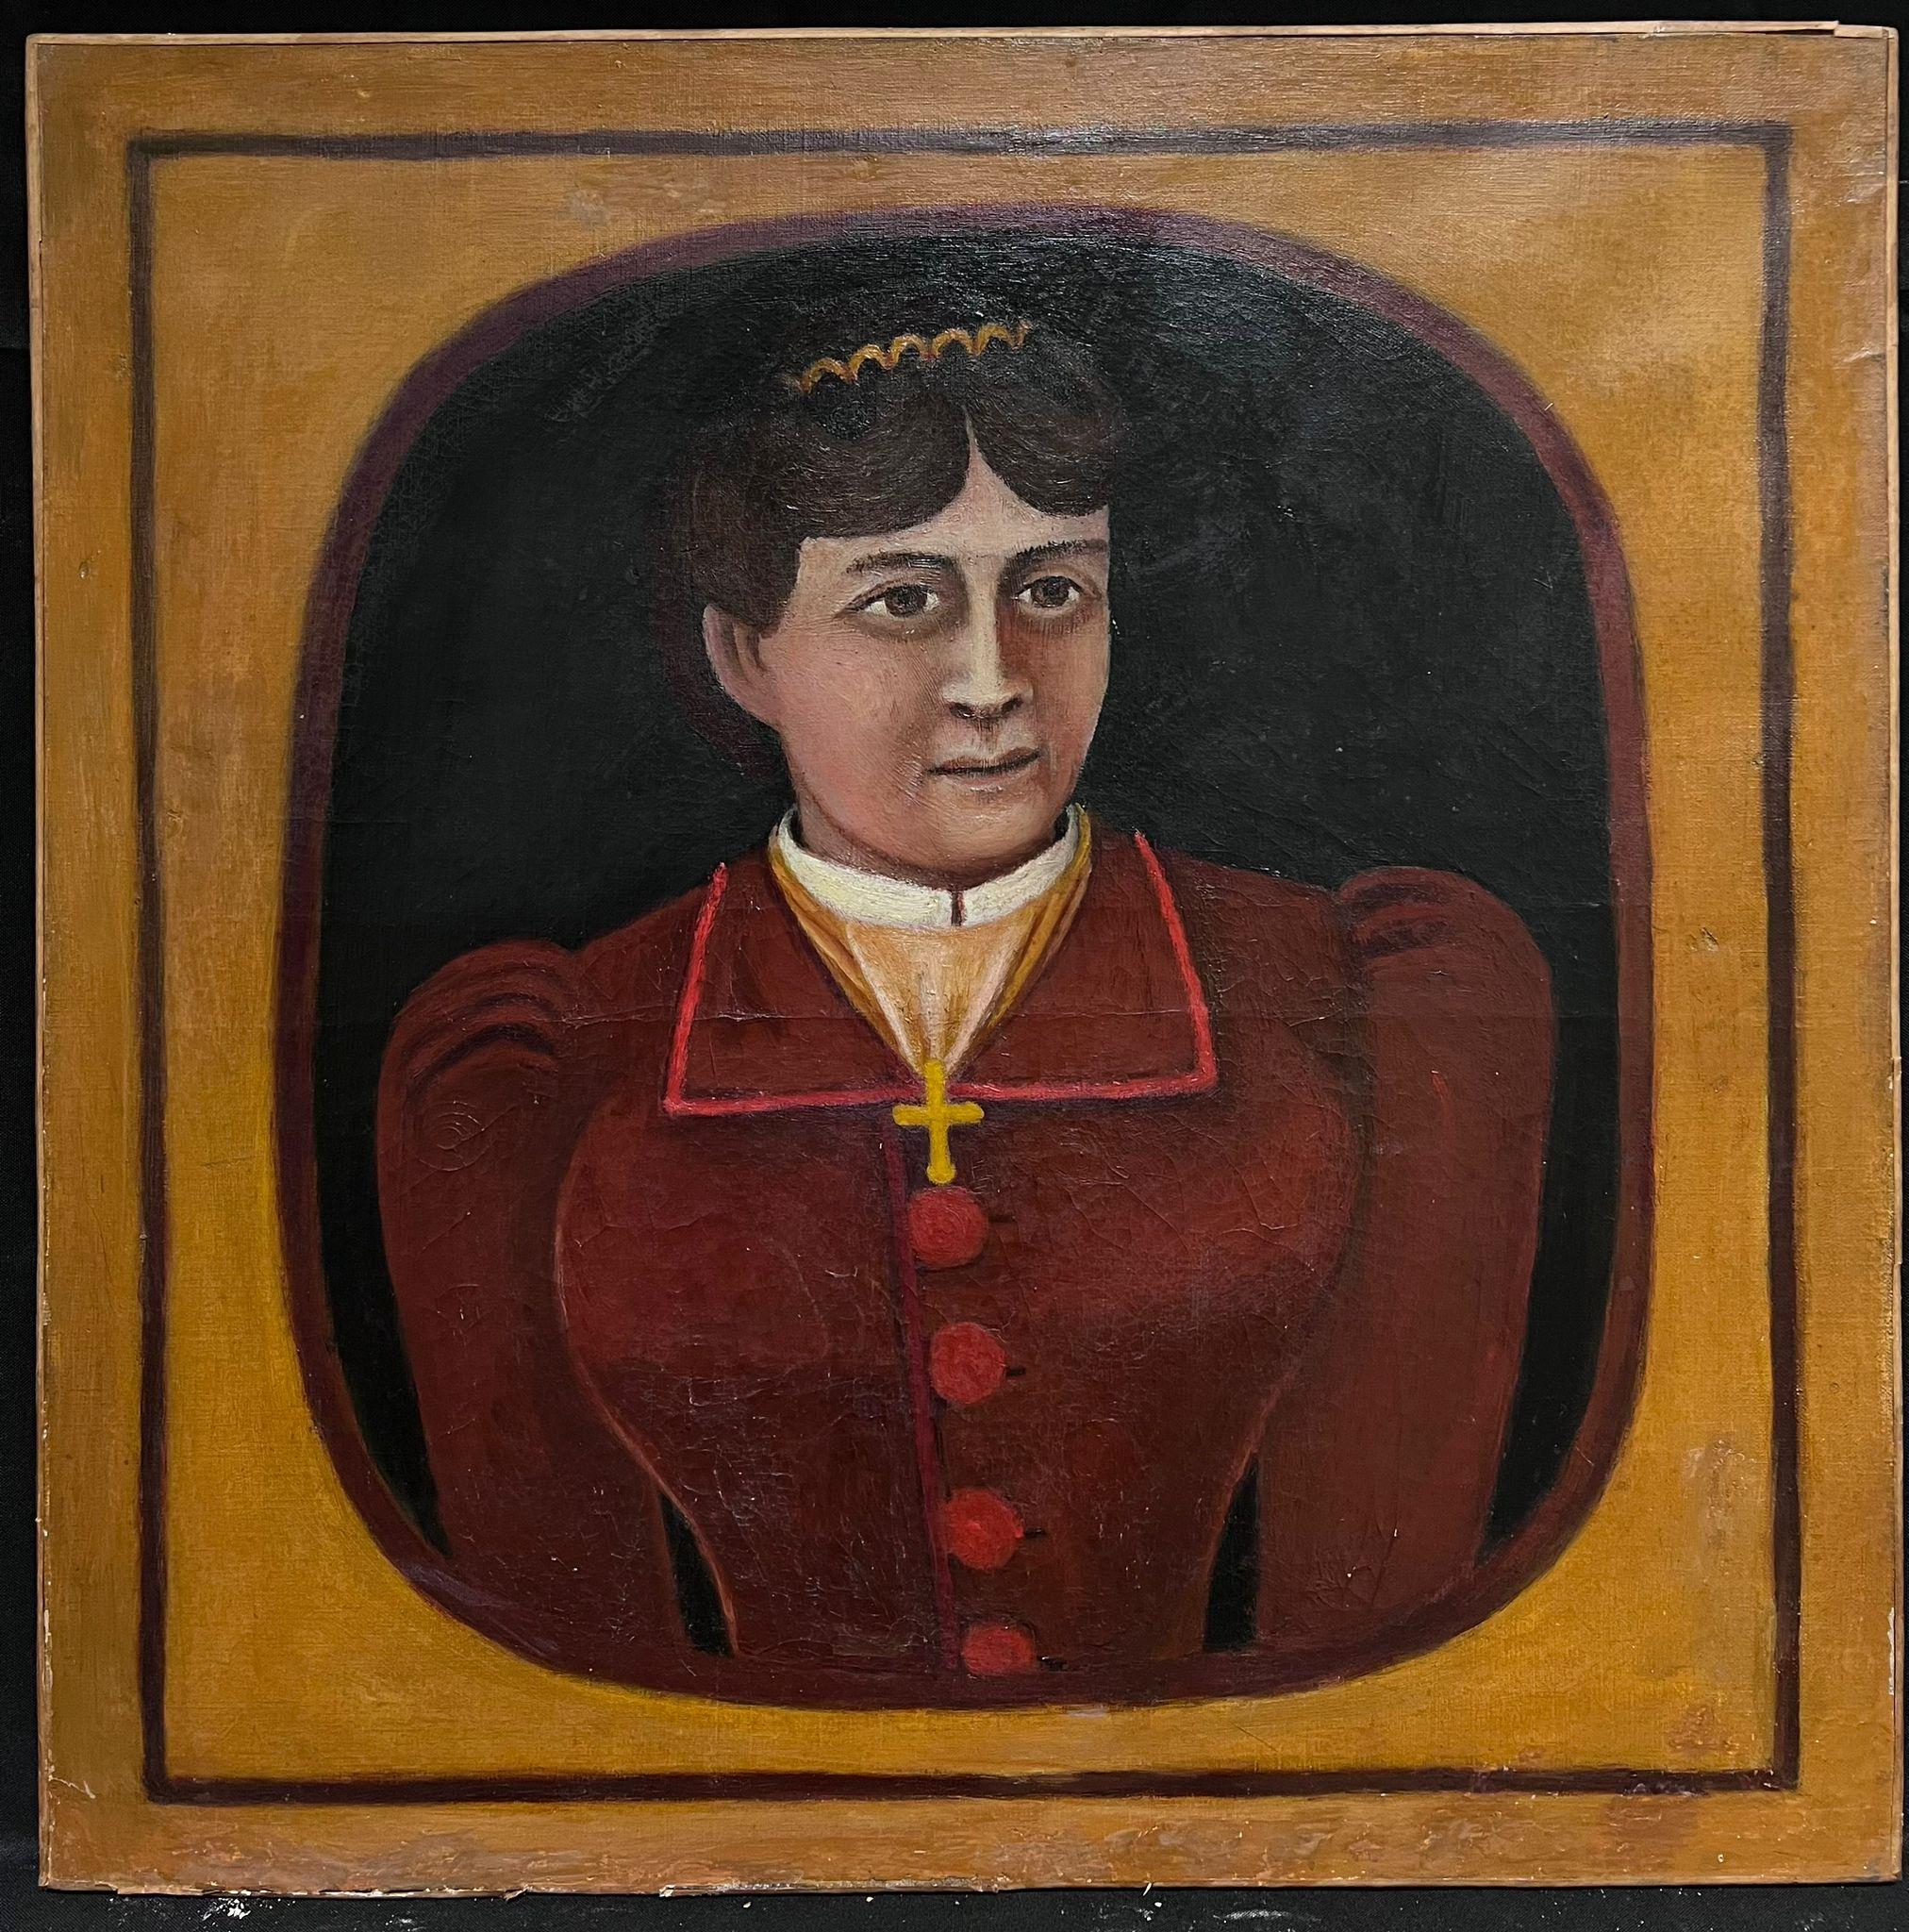 Portrait of a Lady
French School, 19th century
circle of Henri Rousseau, French 1844 - 1910
oil on canvas, unframed
canvas: 24 x 23.5 inches
provenance: private collection, France
condition: good and sound condition but with some surface abrasions,